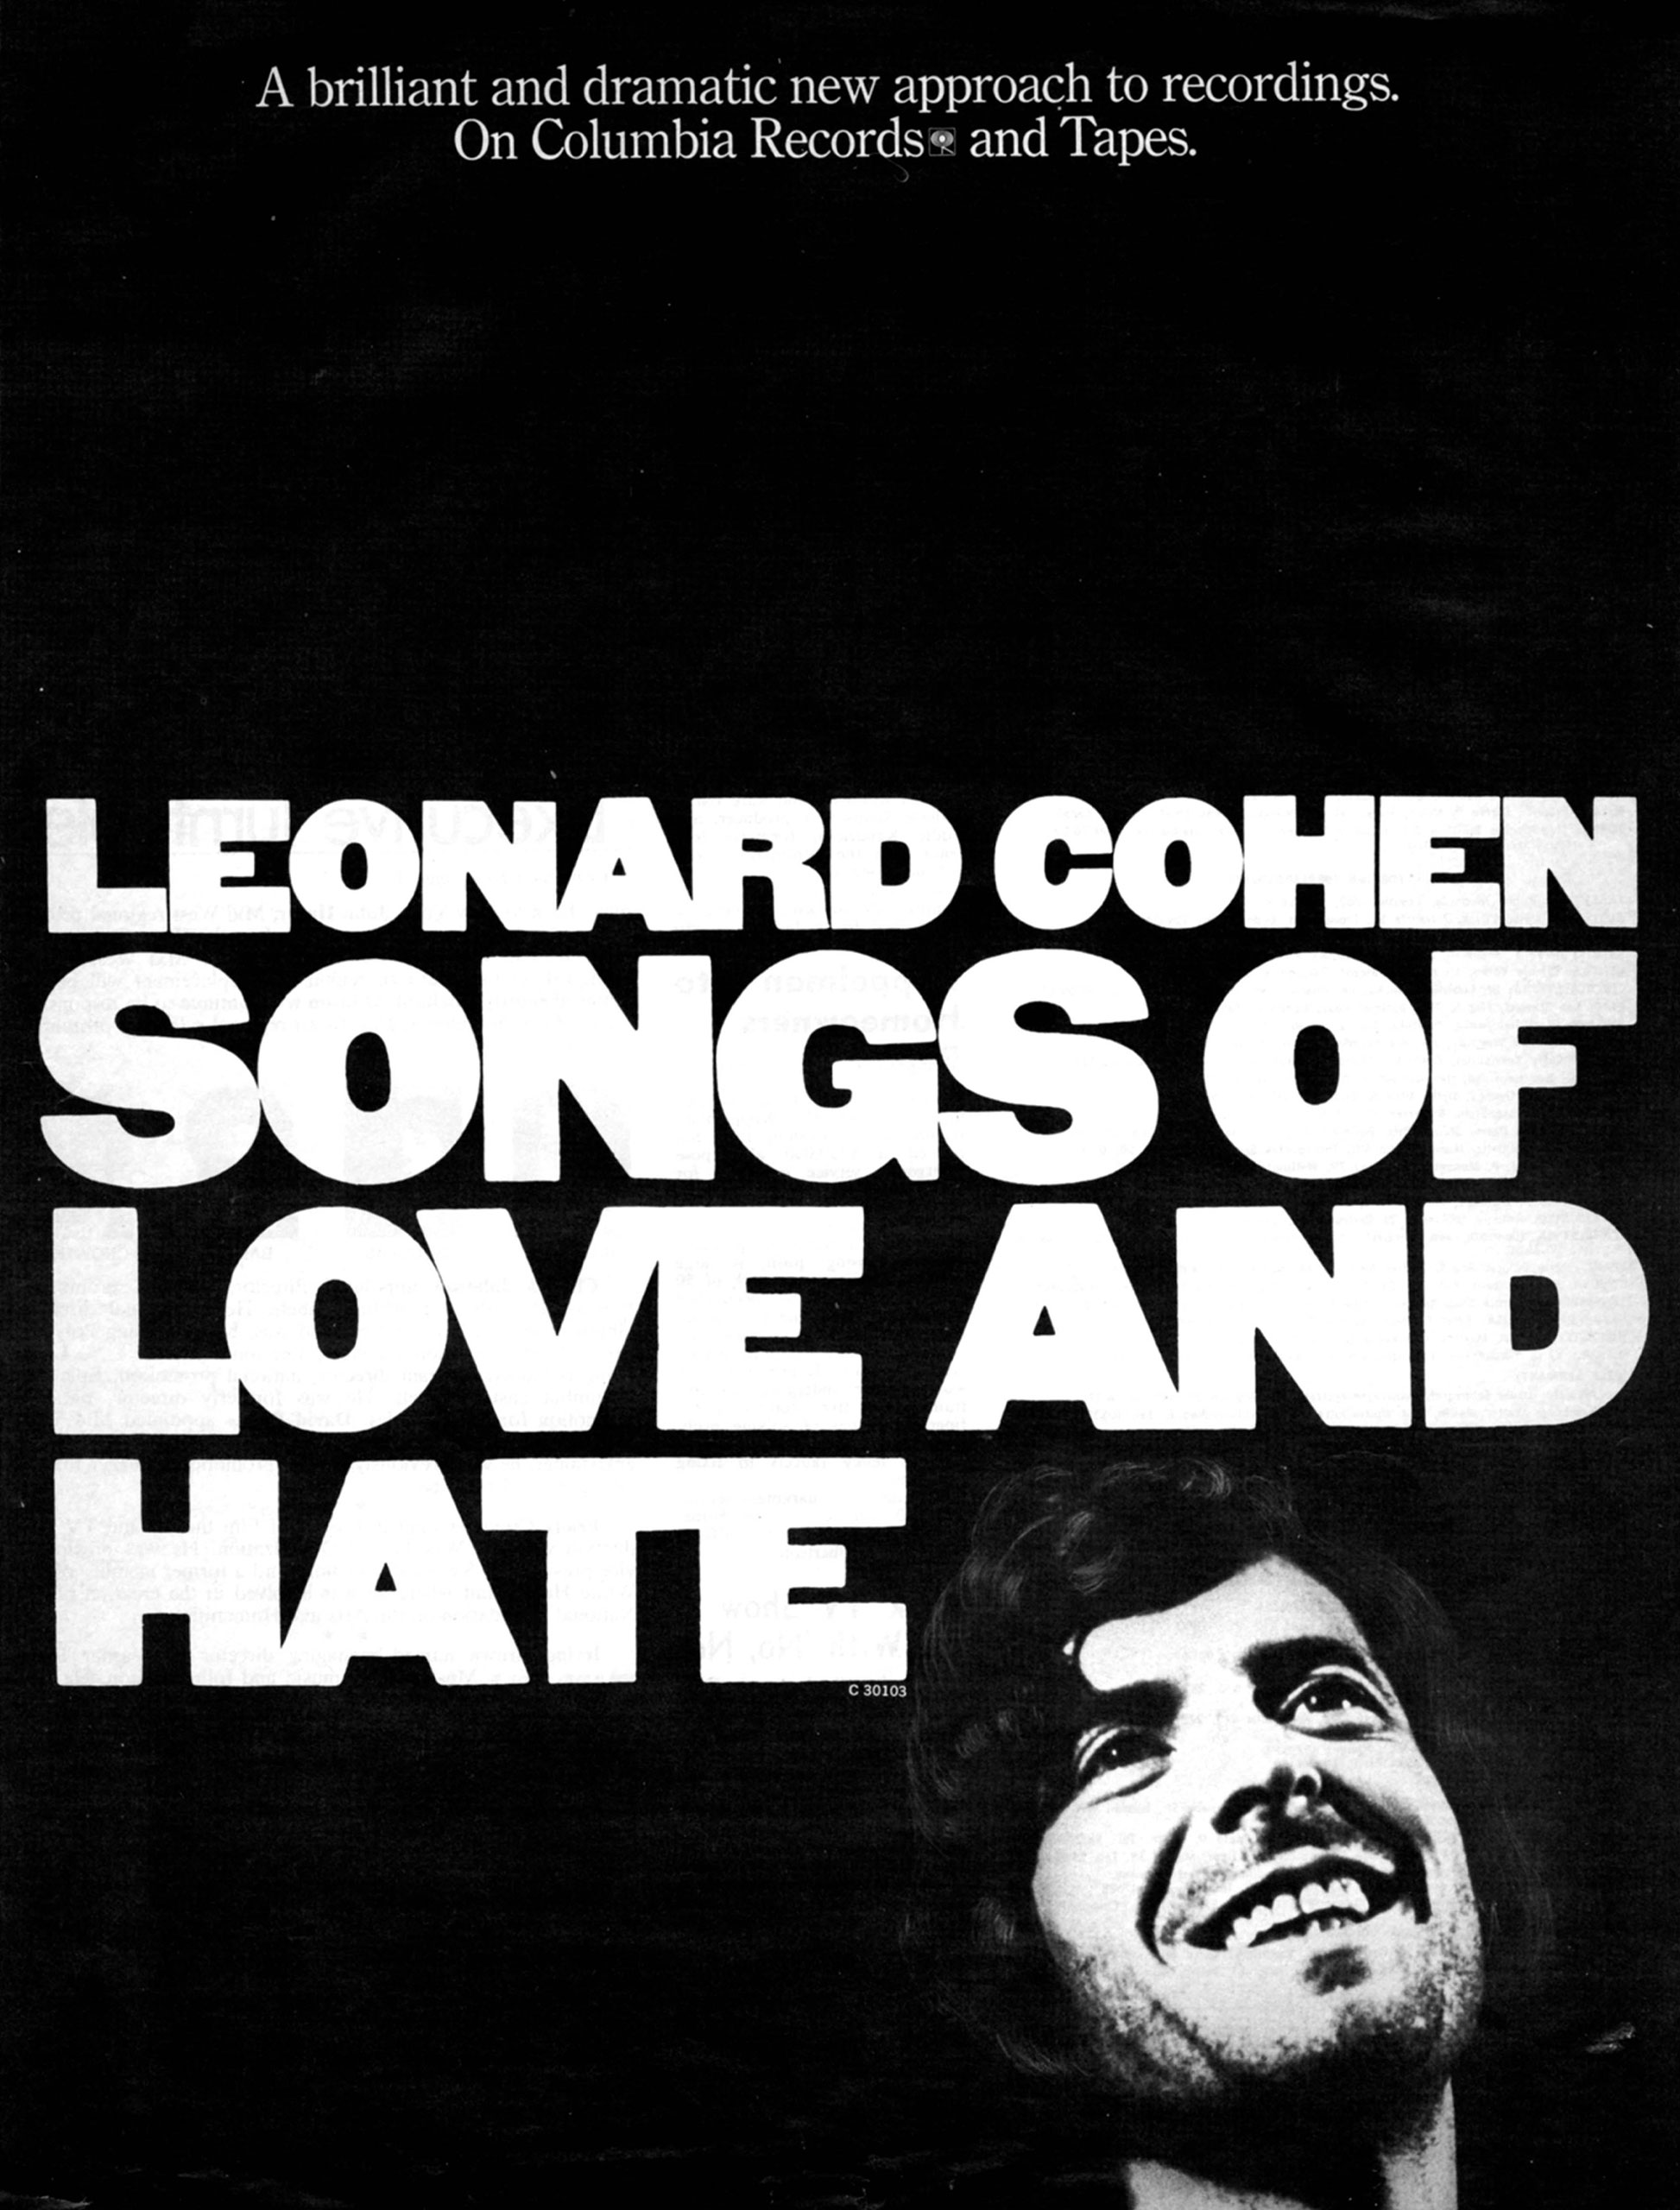 Advertisement for Leonard Cohen’s album Songs of Love and Hate.